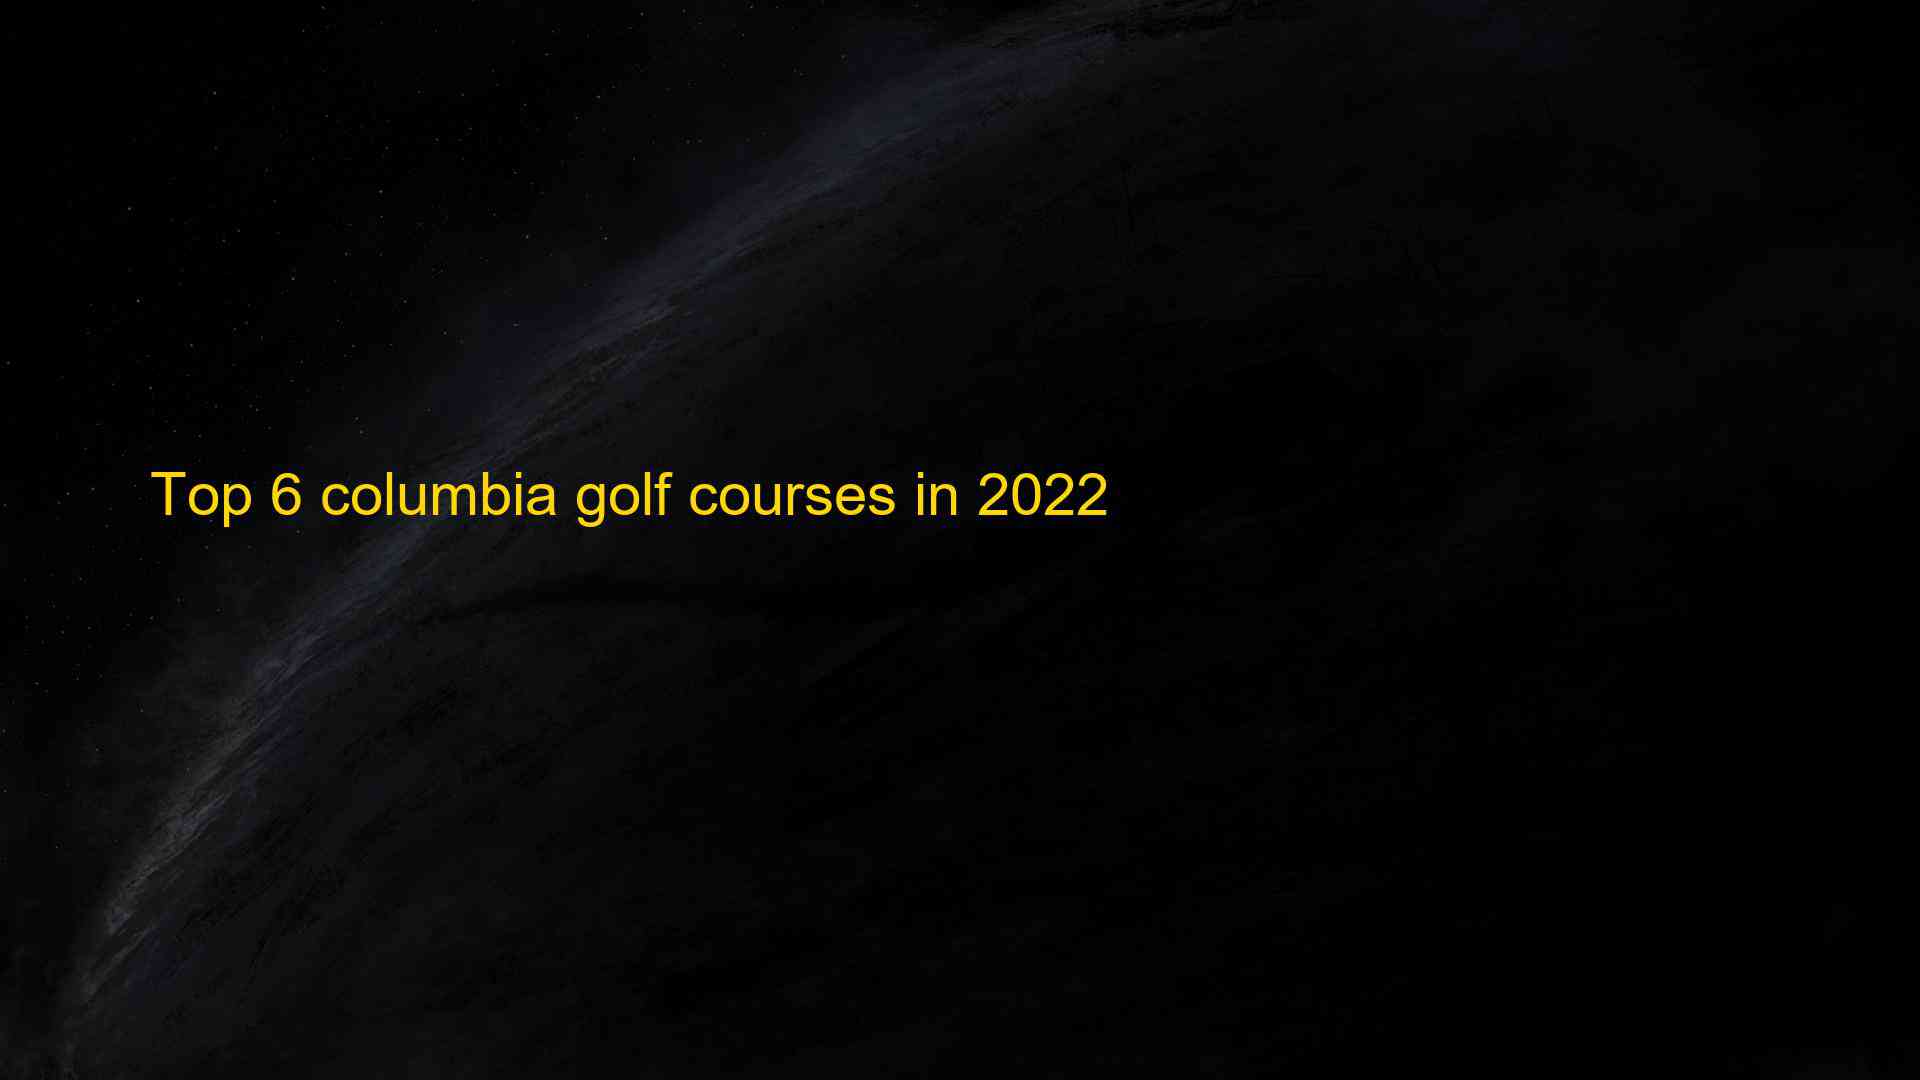 Top 6 columbia golf courses in 2022 1661776701